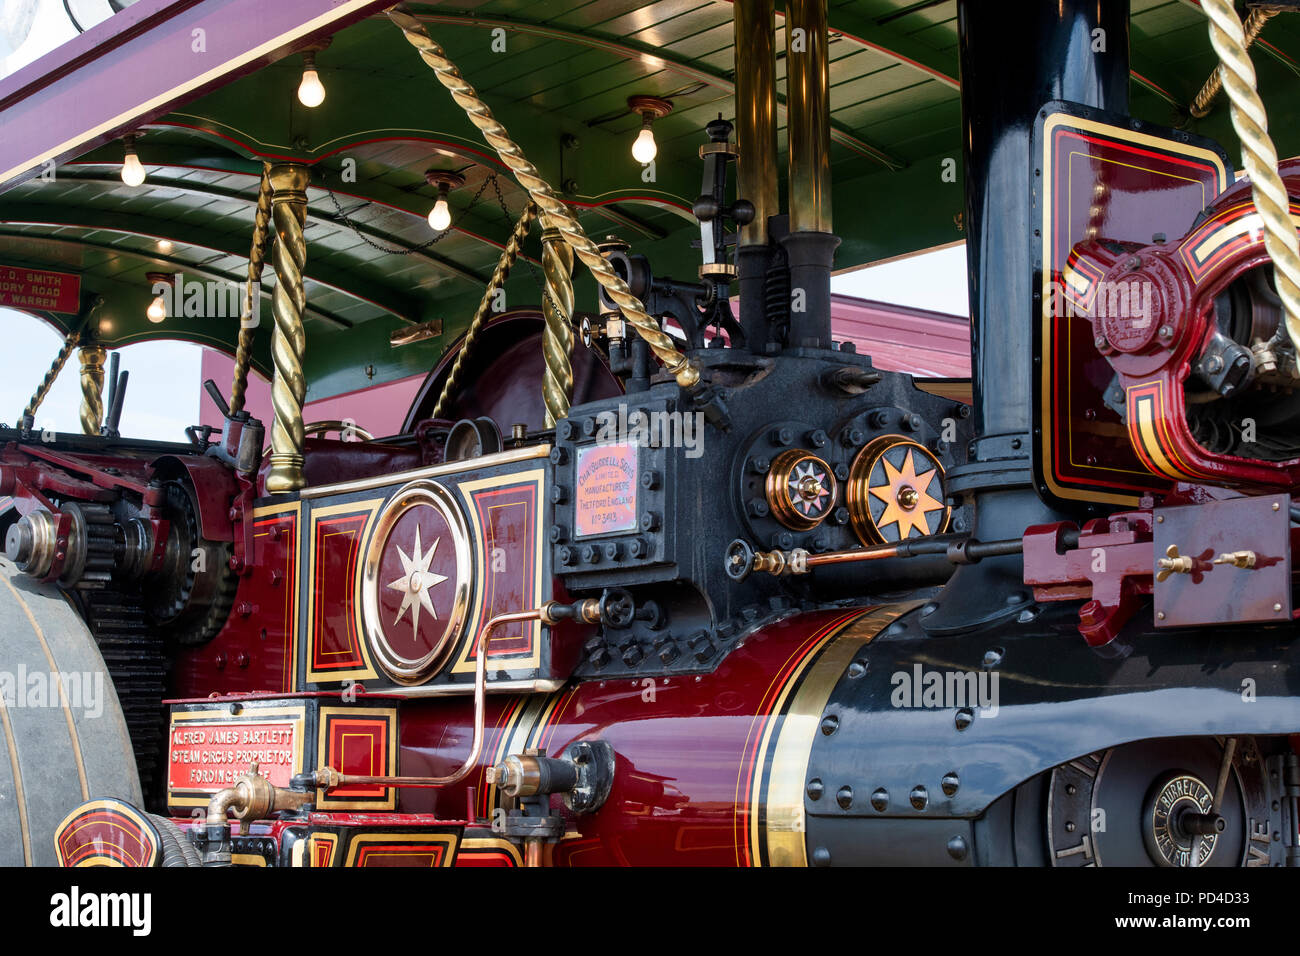 Burrell Road Locomotive 4066 John of Gaunt at a steam fair in England Stock Photo